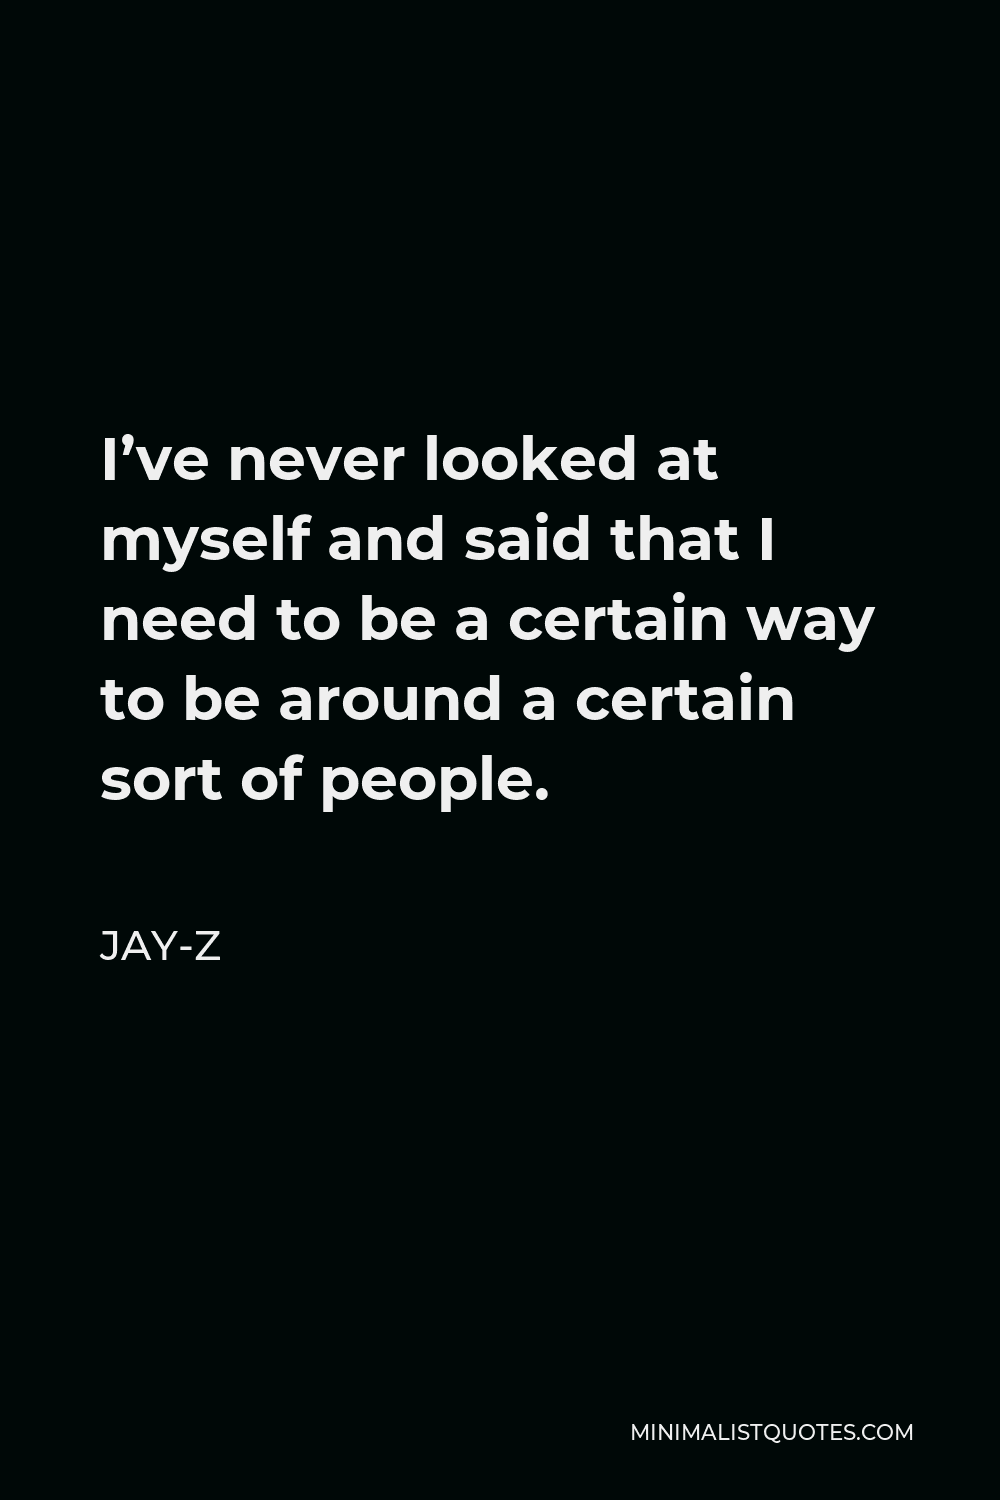 Jay-Z Quote - I’ve never looked at myself and said that I need to be a certain way to be around a certain sort of people.